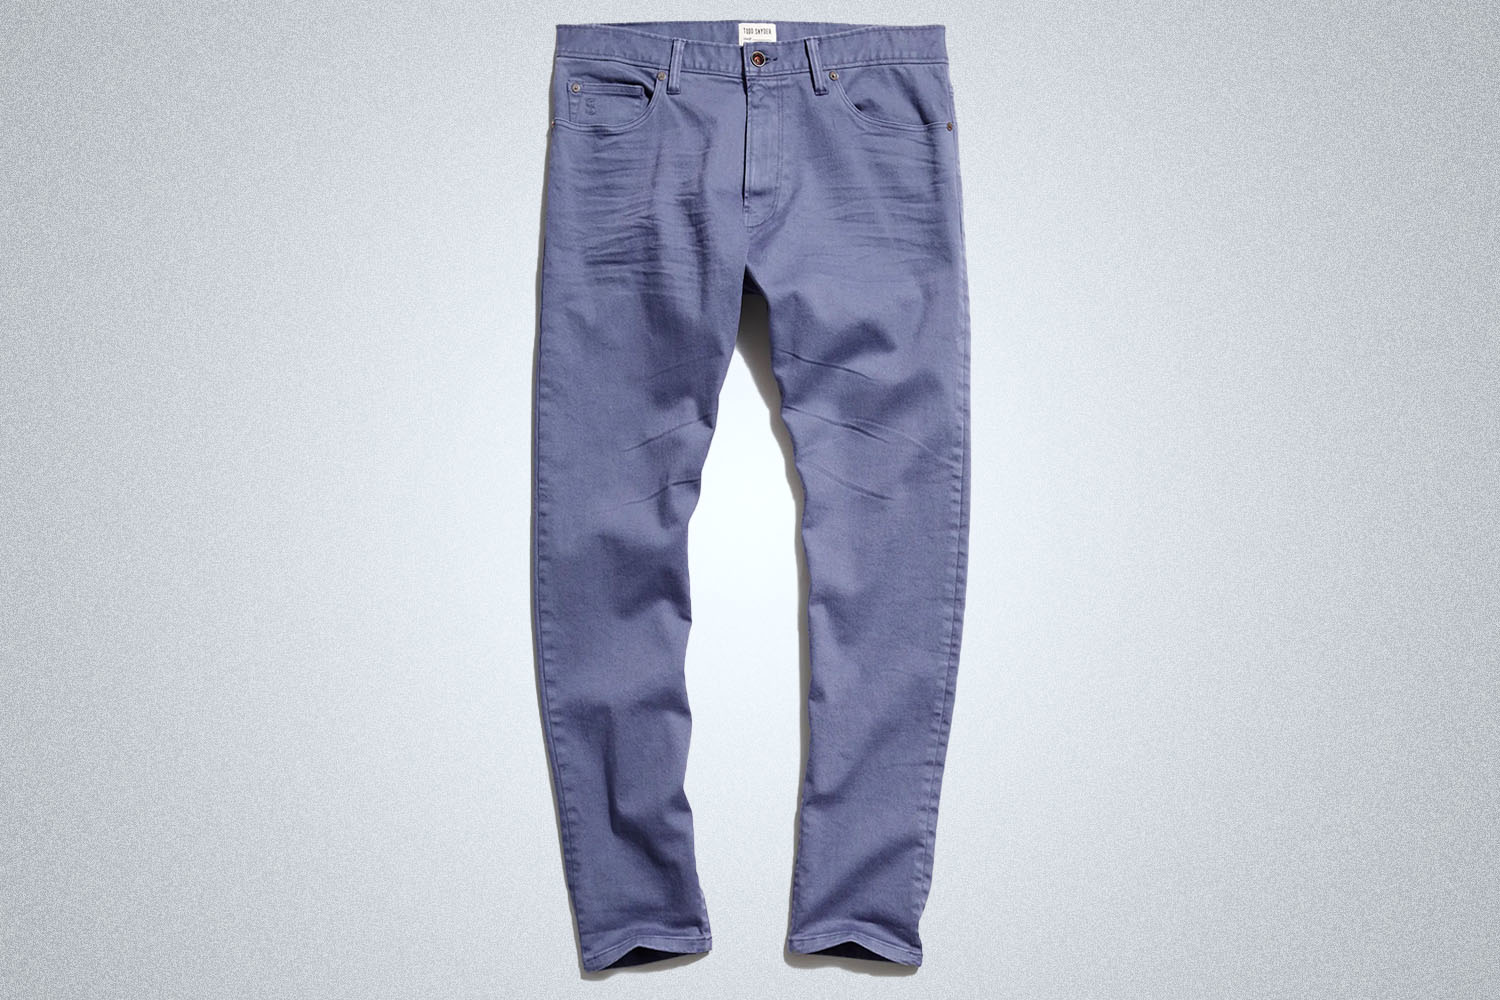 a pair of blue chinos from Todd Snyder on a grey background